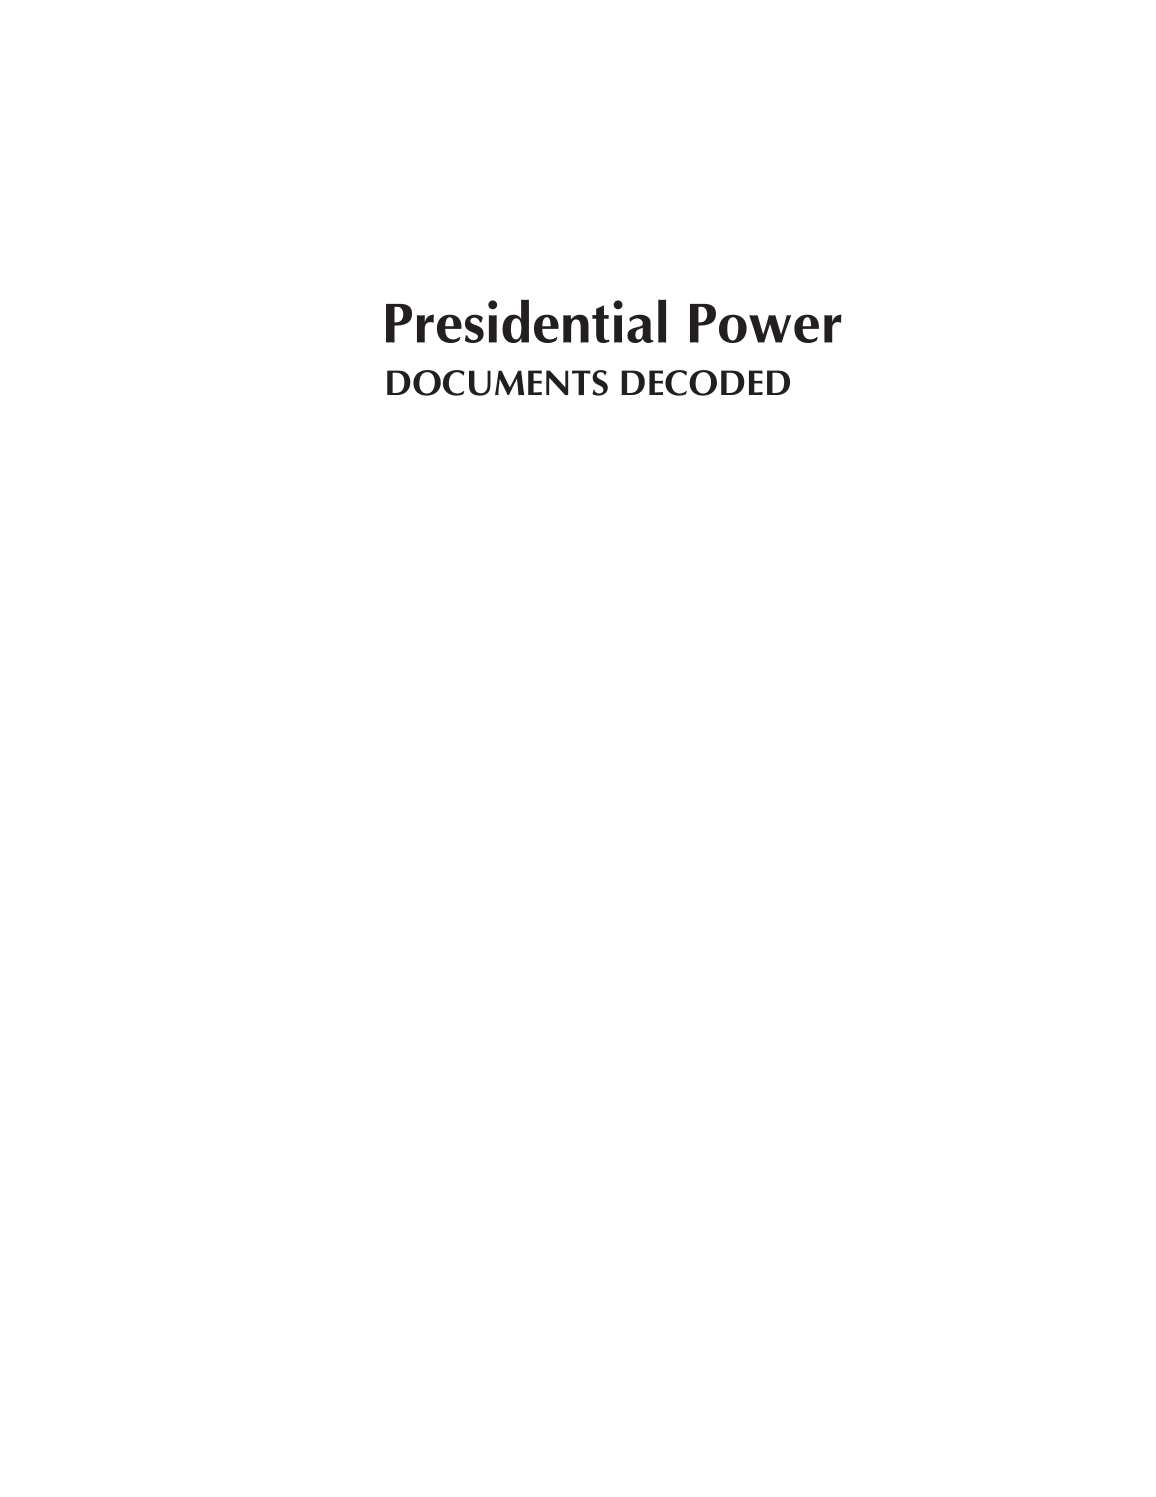 Presidential Power: Documents Decoded page i